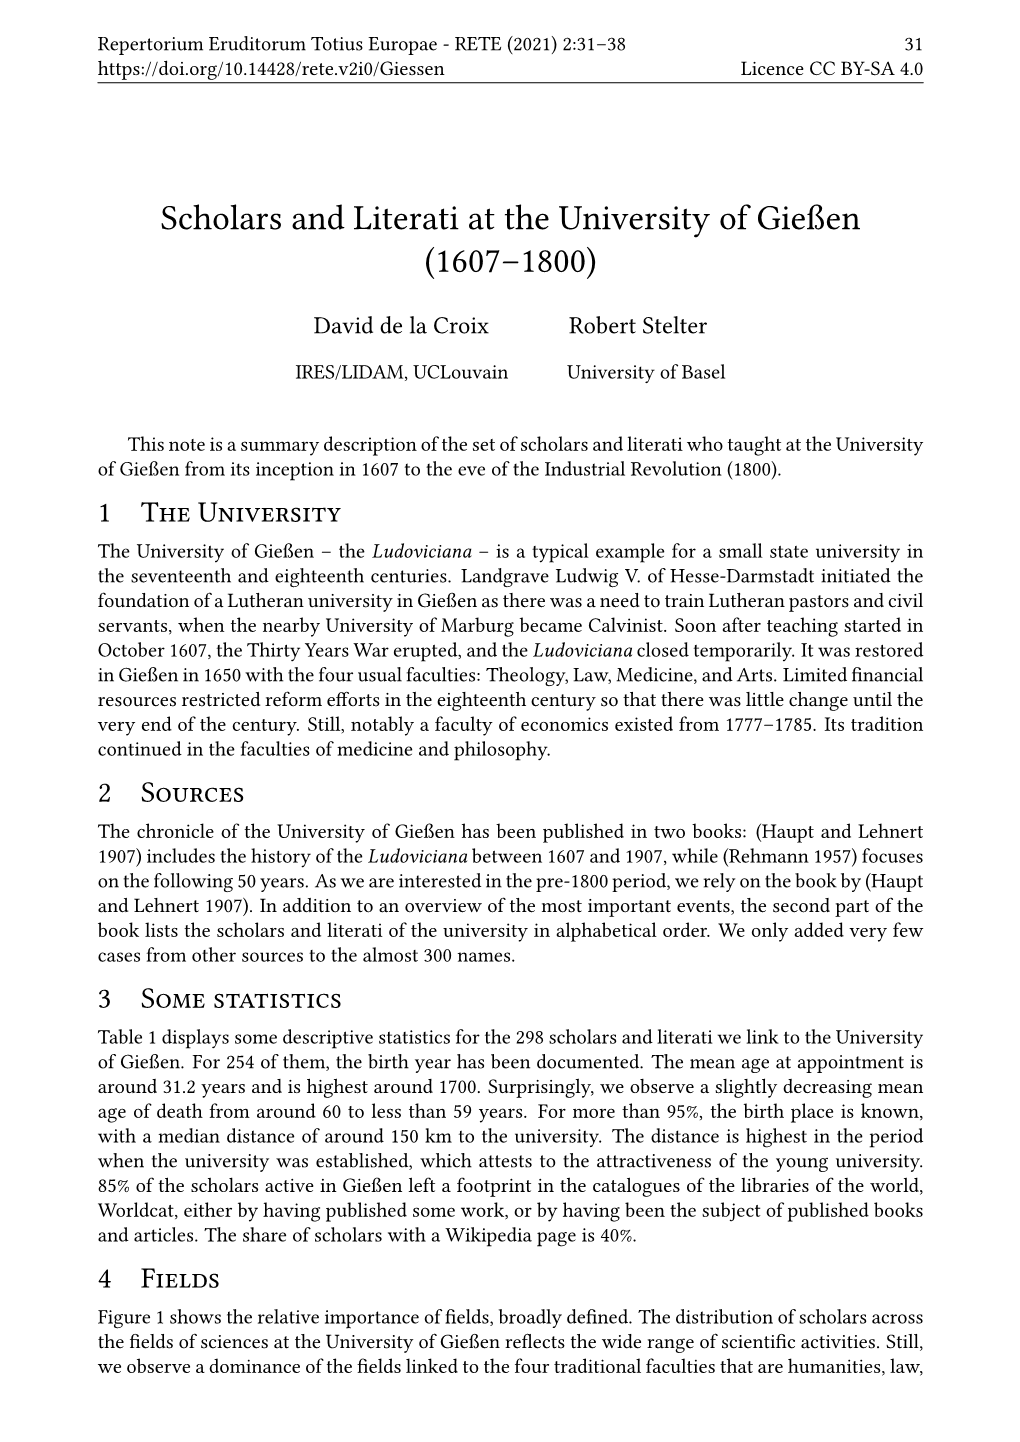 Scholars and Literati at the University of Gießen (1607–1800)